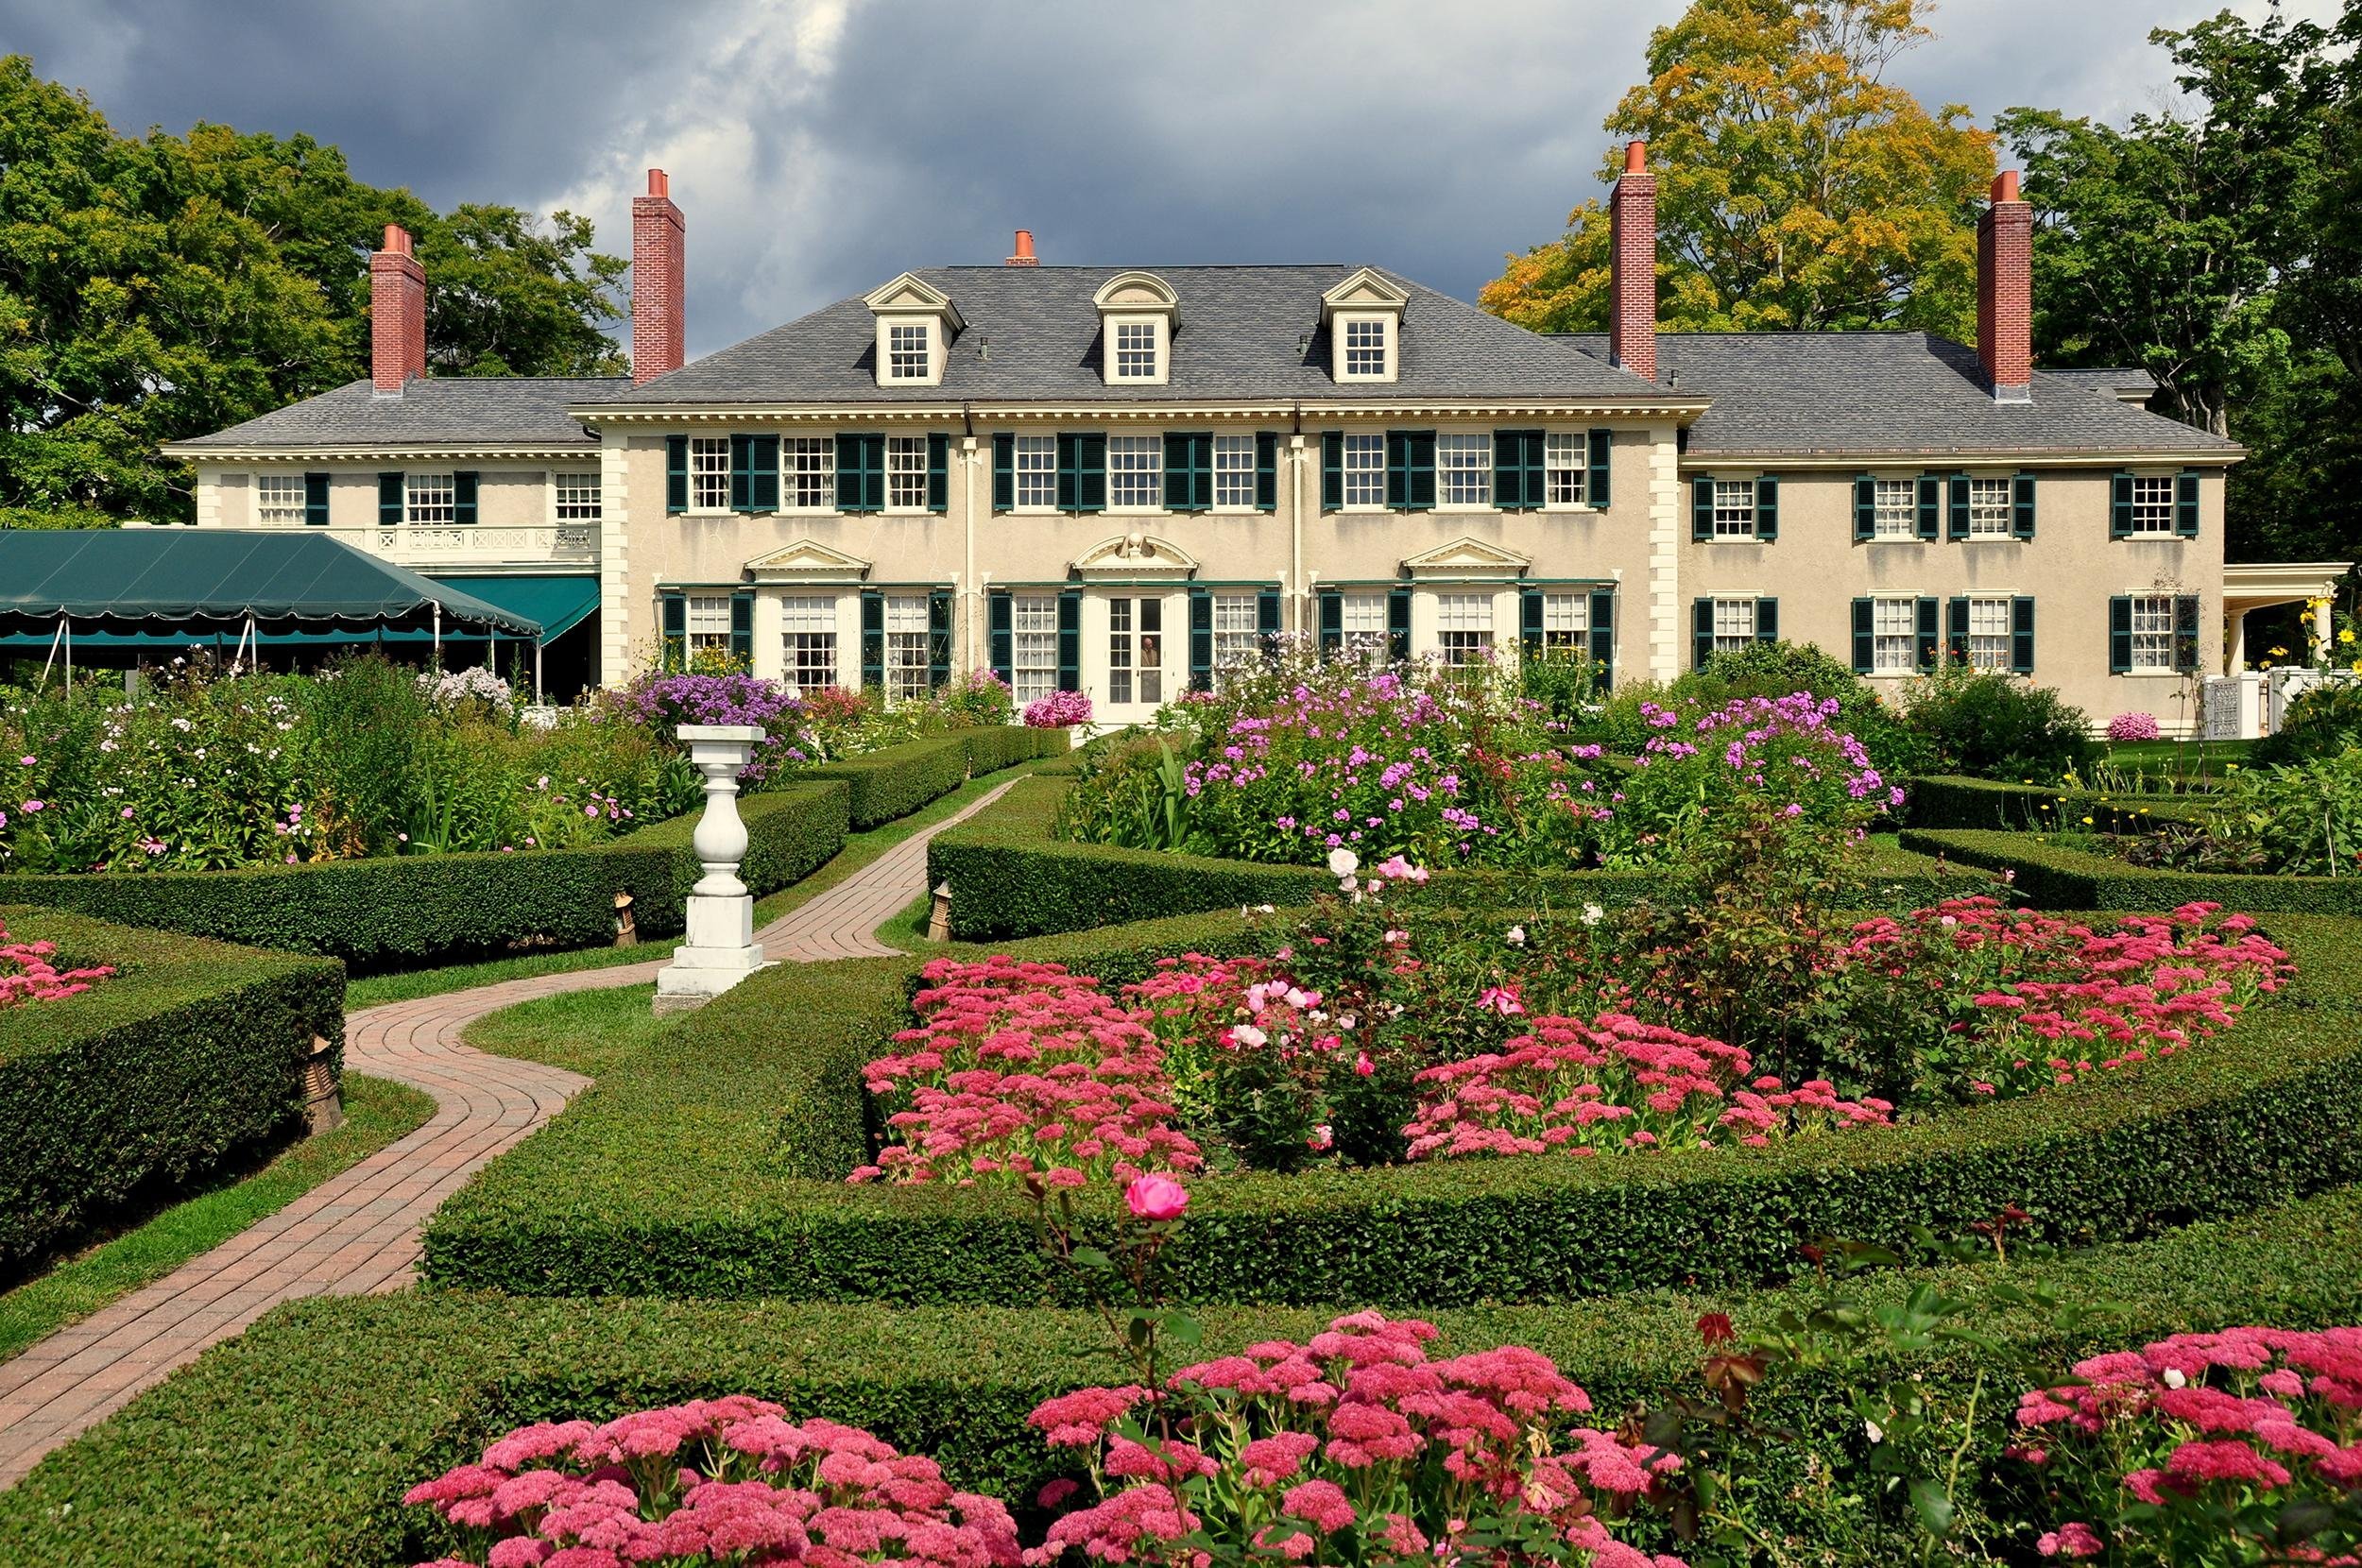 <p><a href="https://www.hildene.org/">Hildene</a> in Manchester, Vermont, was the summer home of President Lincoln's eldest son. The house remained in the Lincoln family until 1975, and was purchased soon after by the Friends of Hildene. Admission costs $23 for adults and $6 for youth and includes access to the house, farm, and gardens.</p>